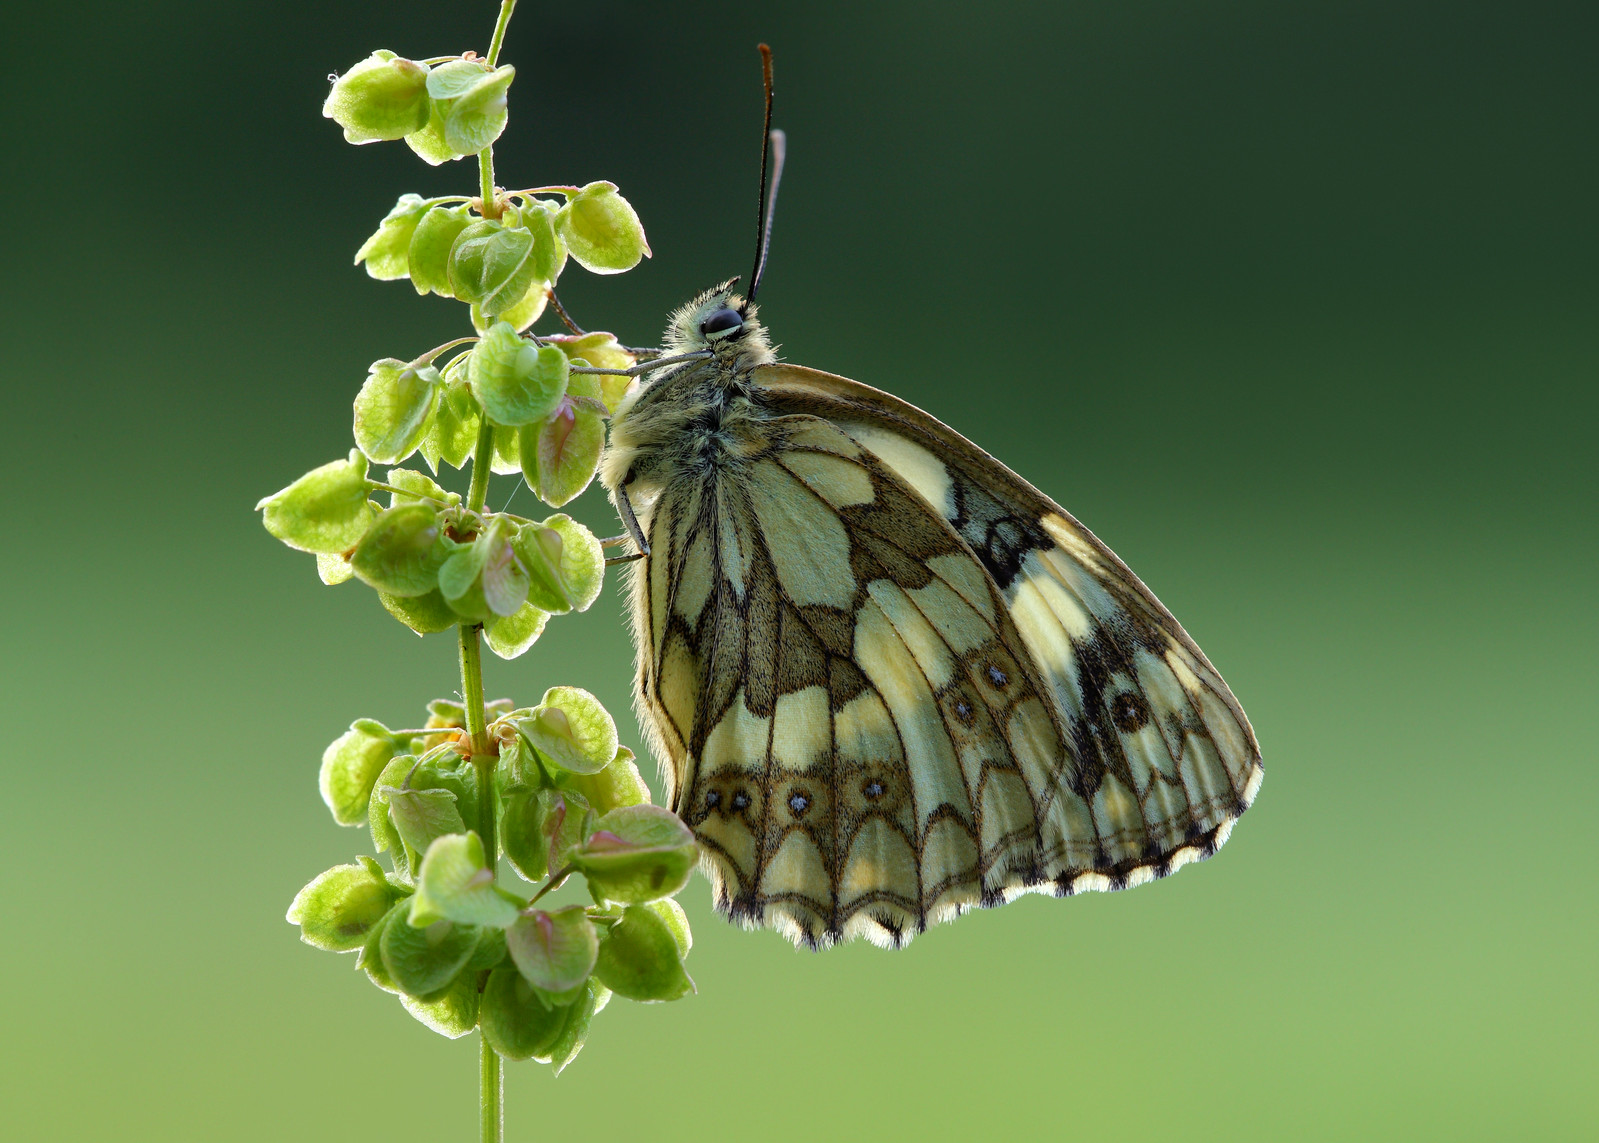 Marbled White Butterfly, Friston Forest